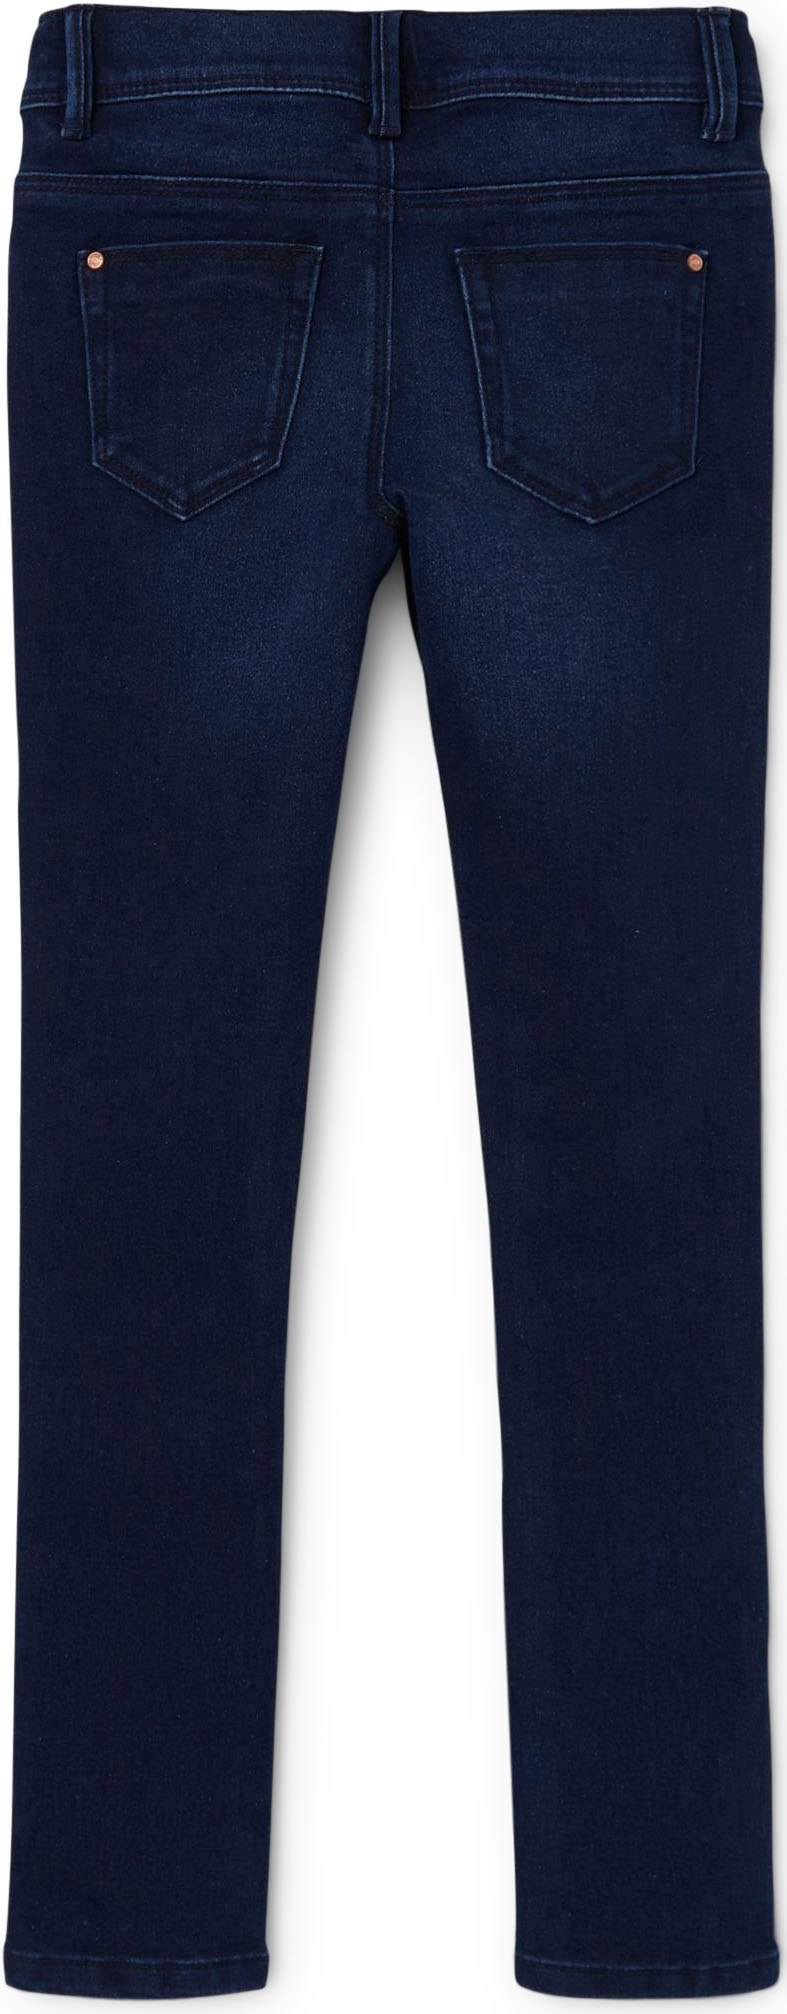 PANT« Stretch-Jeans It bestellen DNMTAX »NKFPOLLY Name